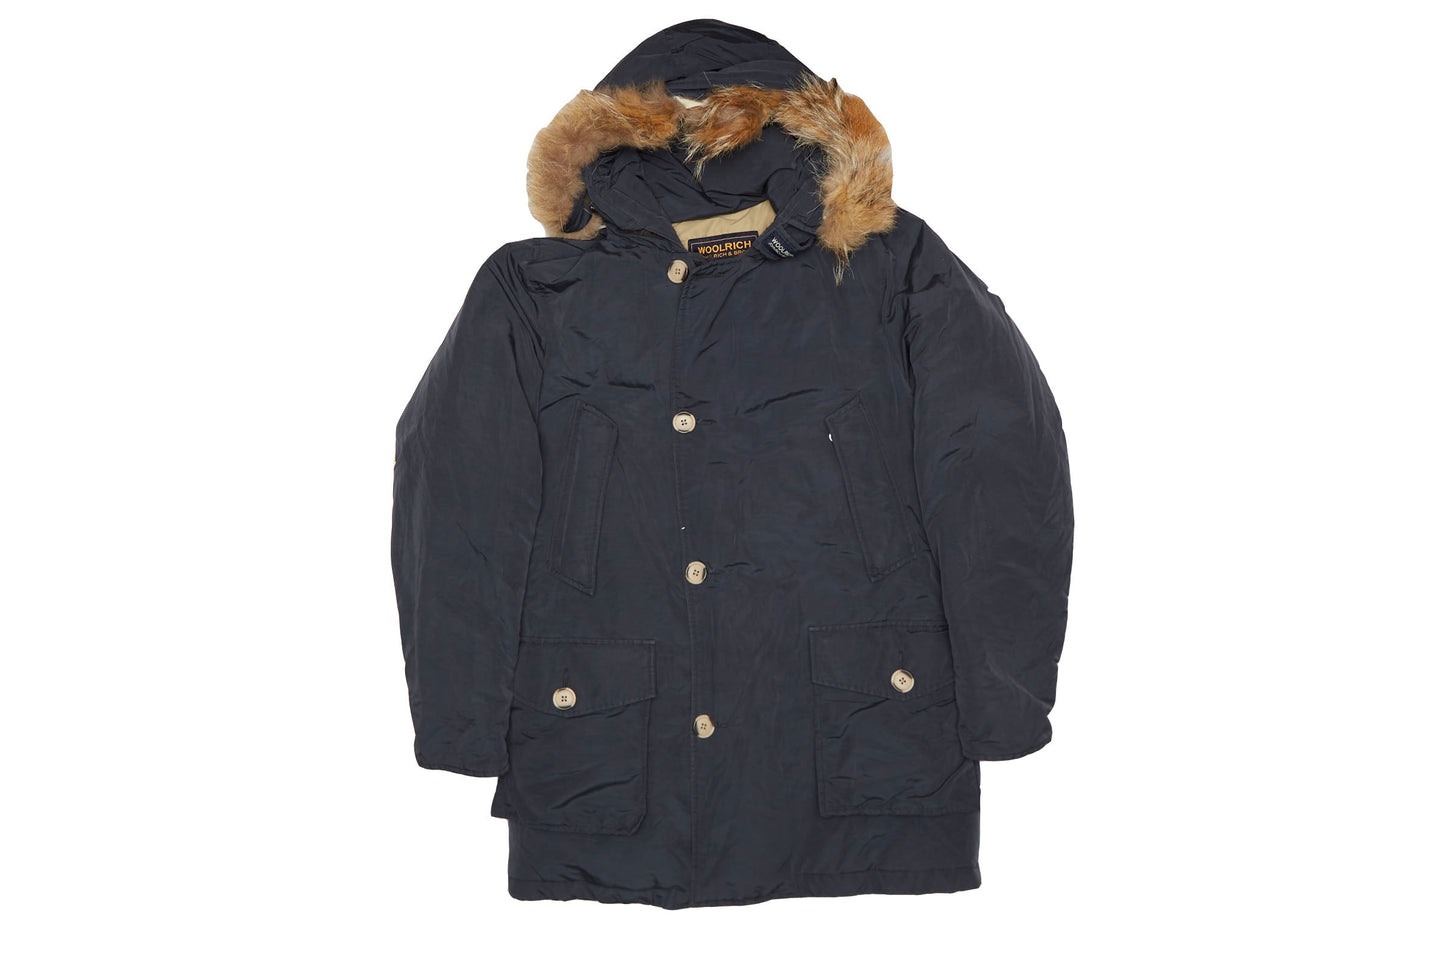 Mens Woolrich Insulated Jacket - XS